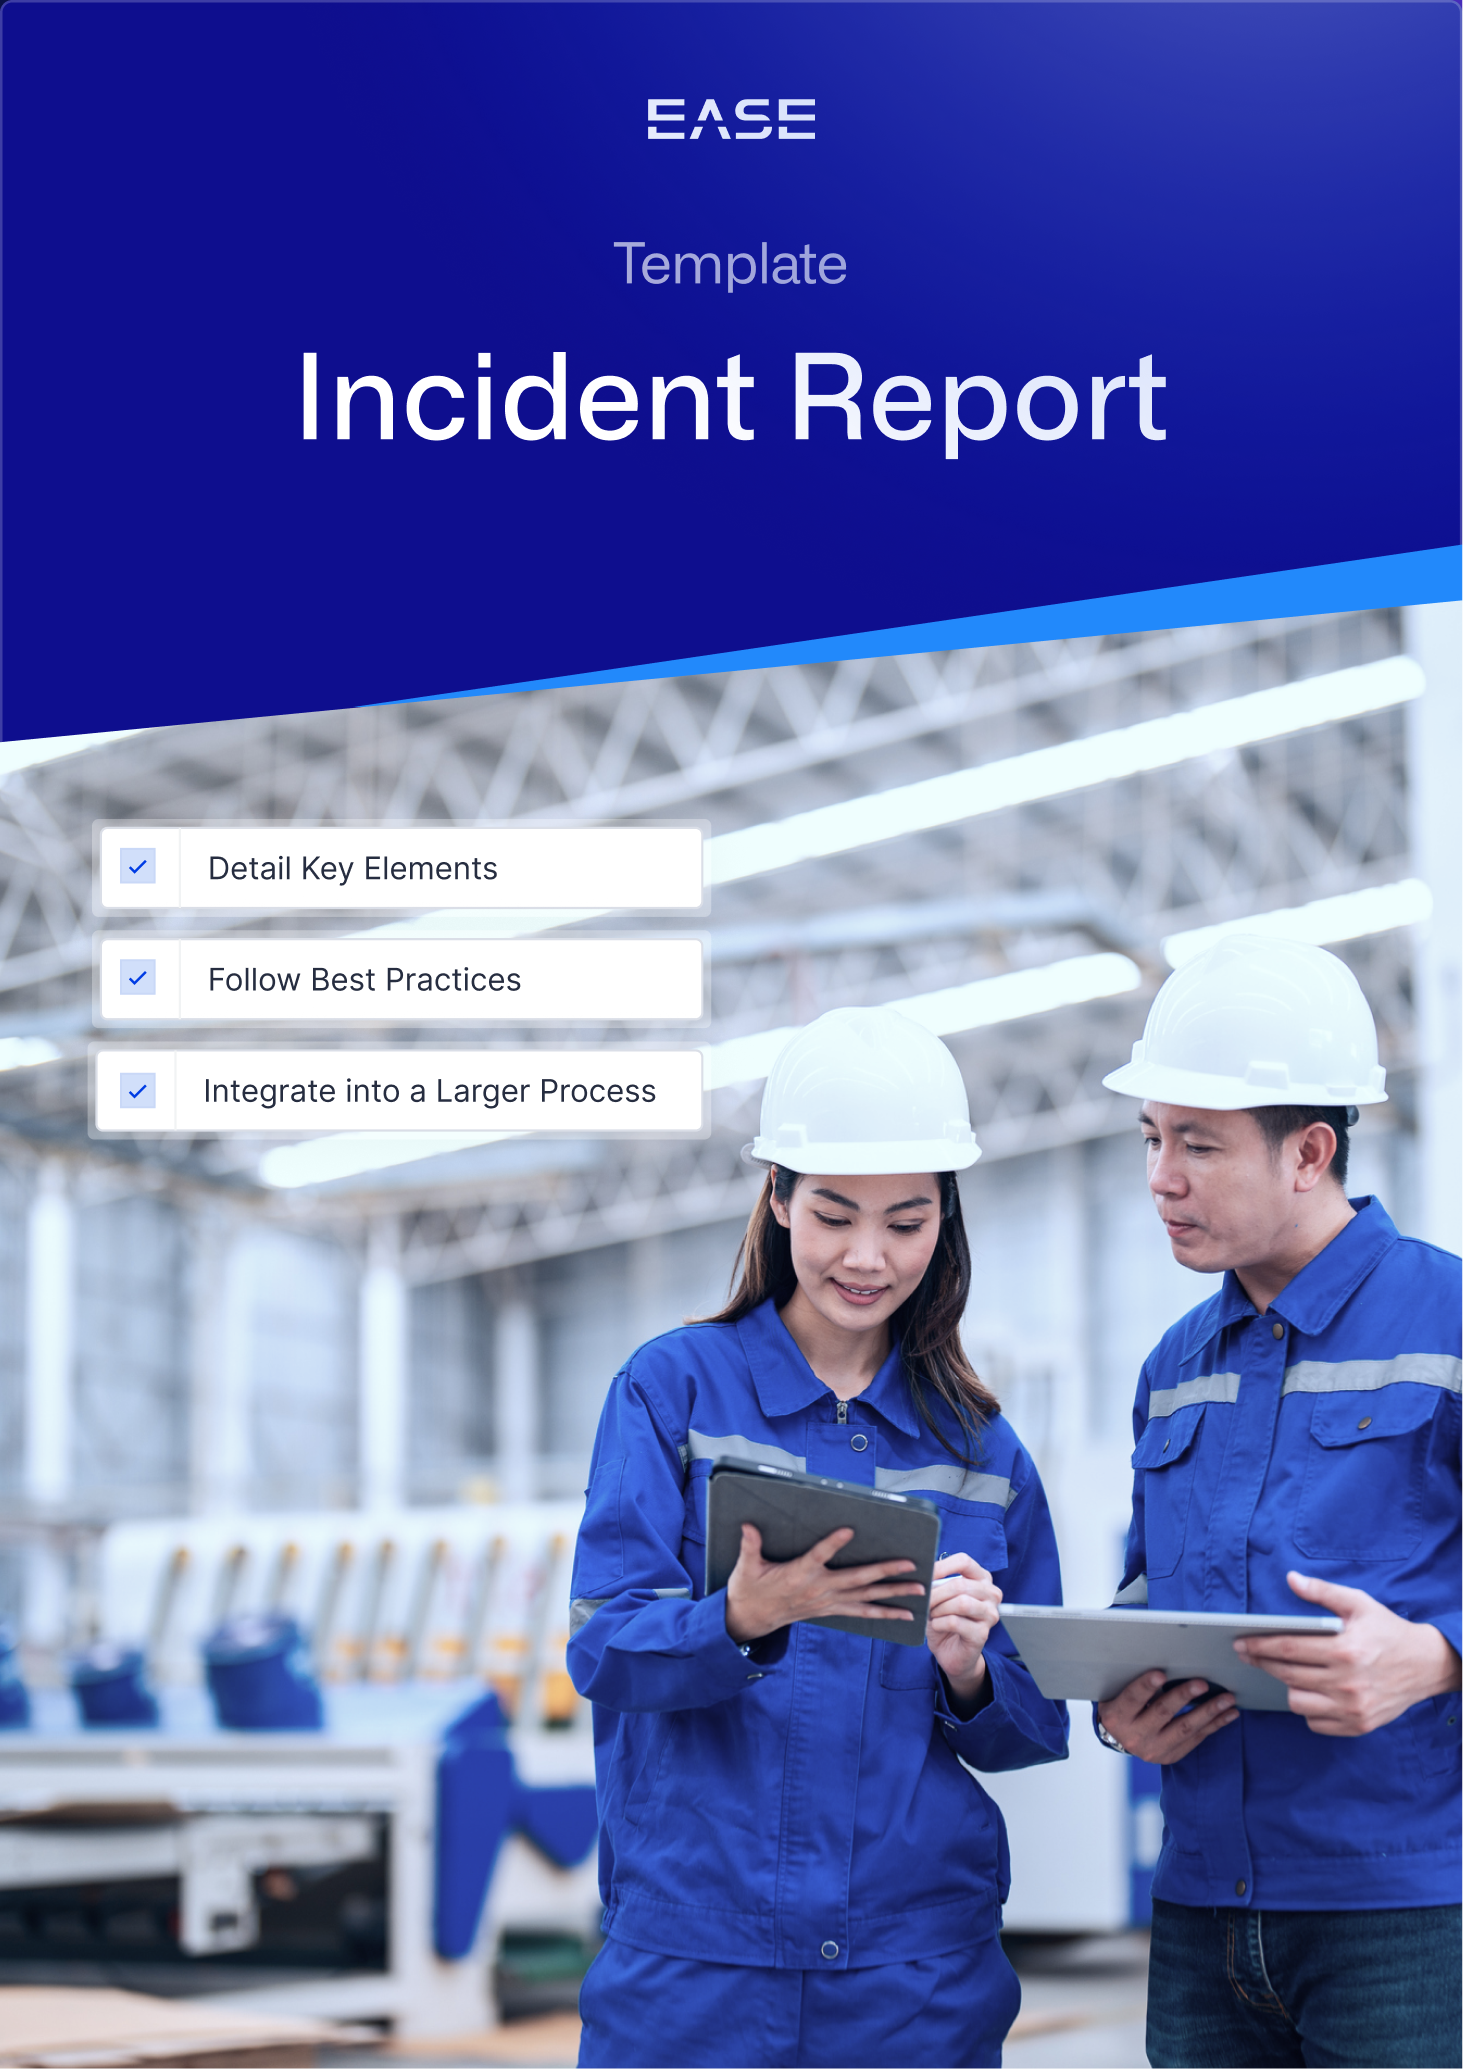 TP 002 Incident Report Cover Image 974x1379px